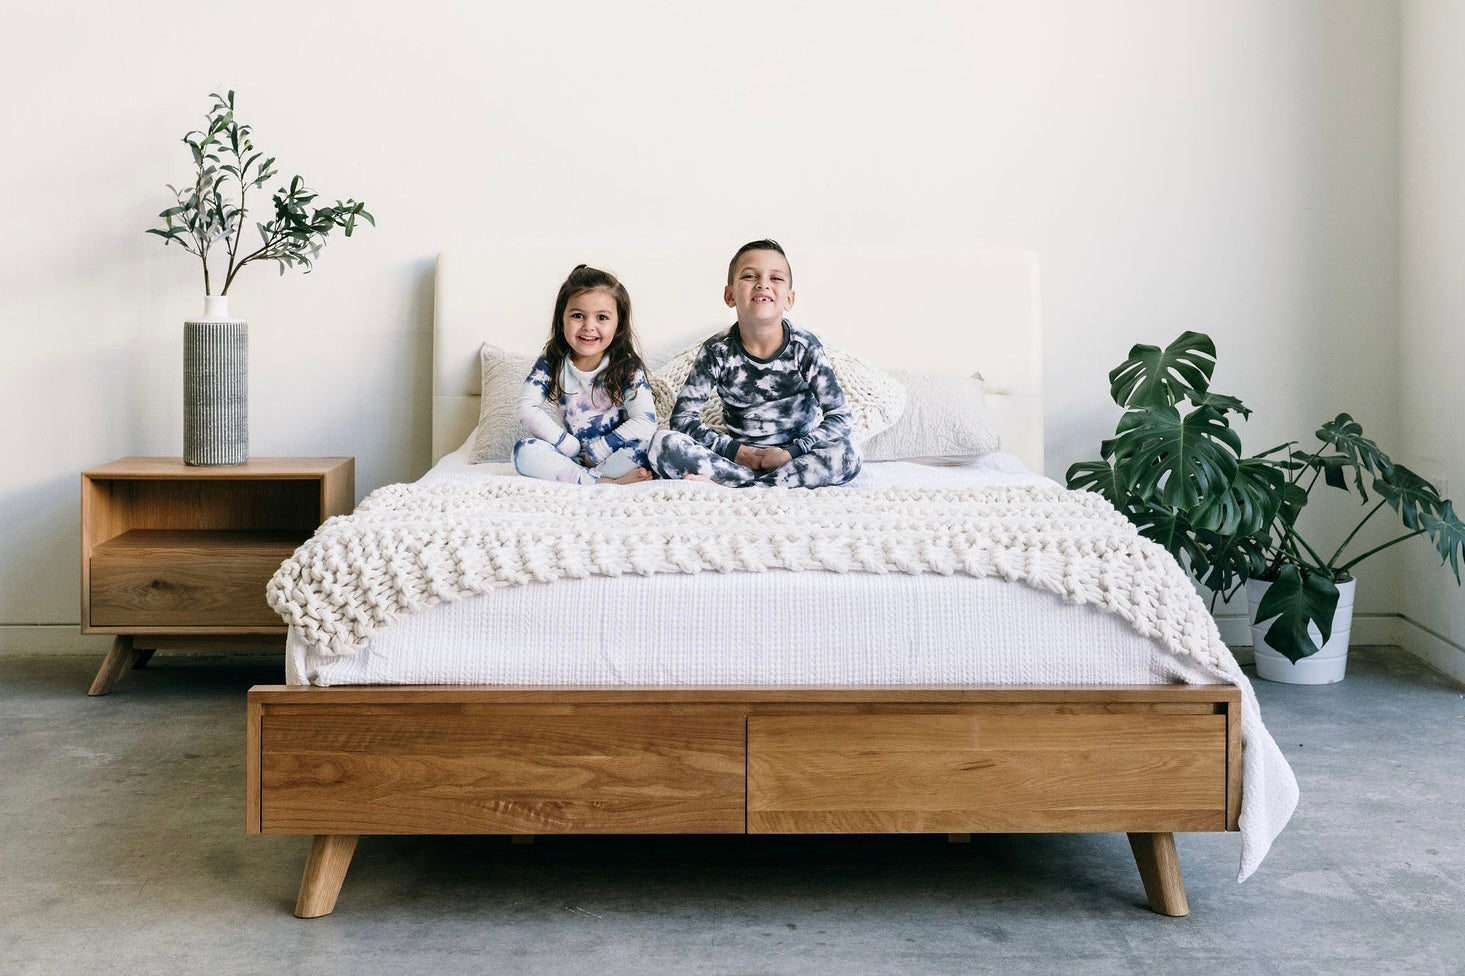 Mim Concept best Modern furniture stores in Toronto, Ottawa and Mississauga to sell modern contemporary bedroom furniture and condo furniture Italian leather headboard bed Low profile platform storage bed solid oak wood